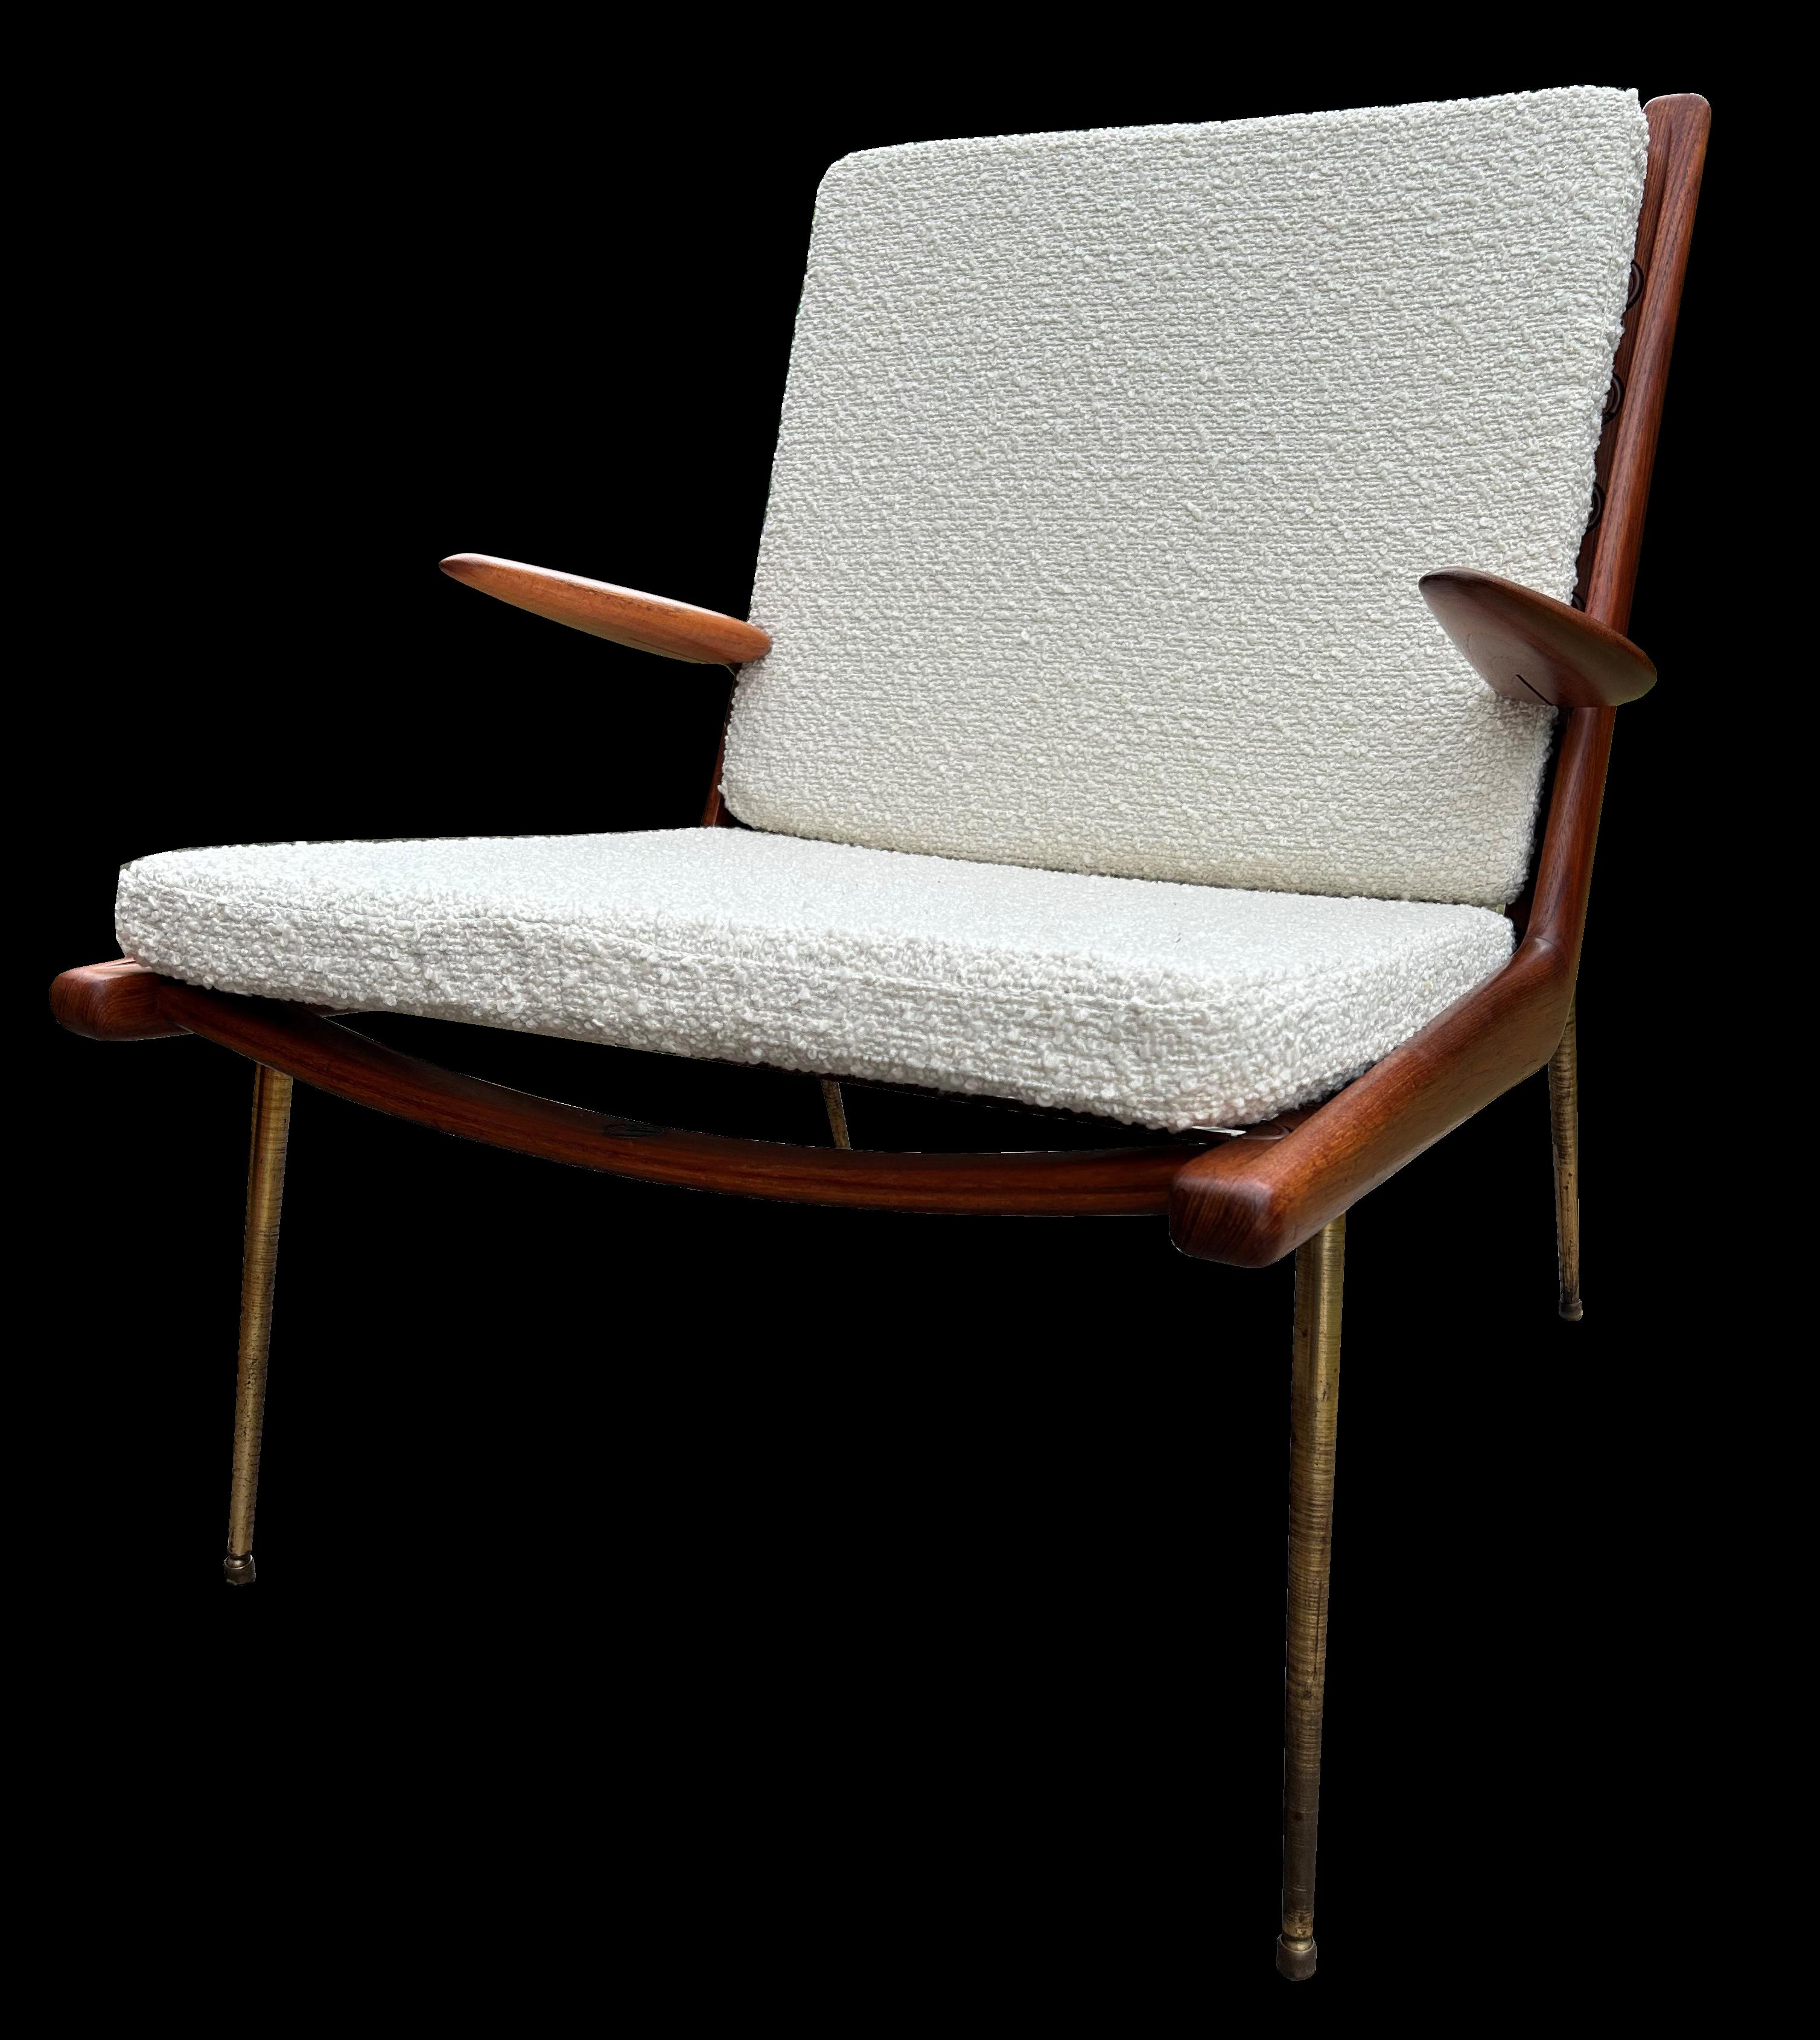 This is is a very nice original armed version of a classic Boomerang chair by Peter Hvidt and Orla Molgaard Nielsen for France & Son, now freshly upholstered in white boucle fabric